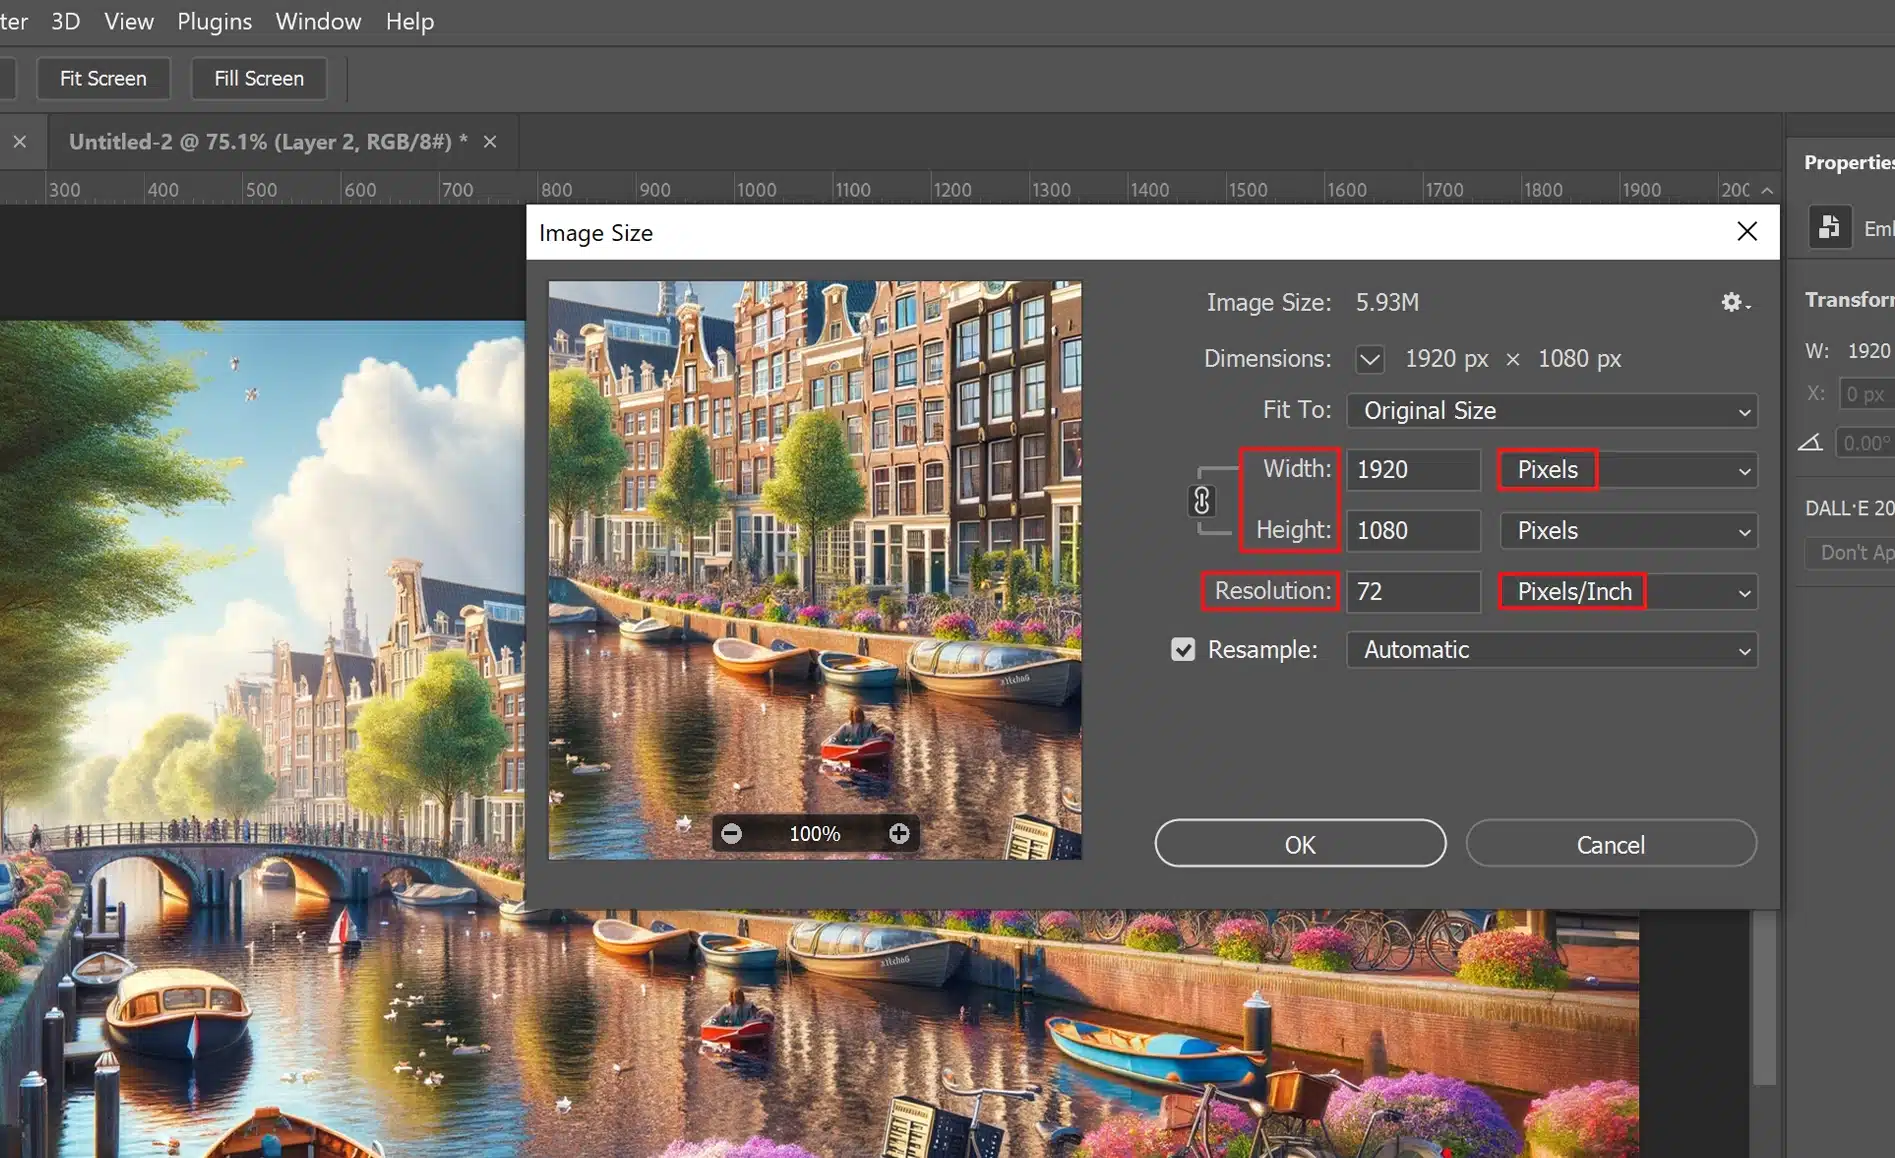 A graphic designer's computer screen displaying the Photoshop Image Size dialog box over an image of Amsterdam canals, with settings adjusted for optimal image dimensions and resolution.